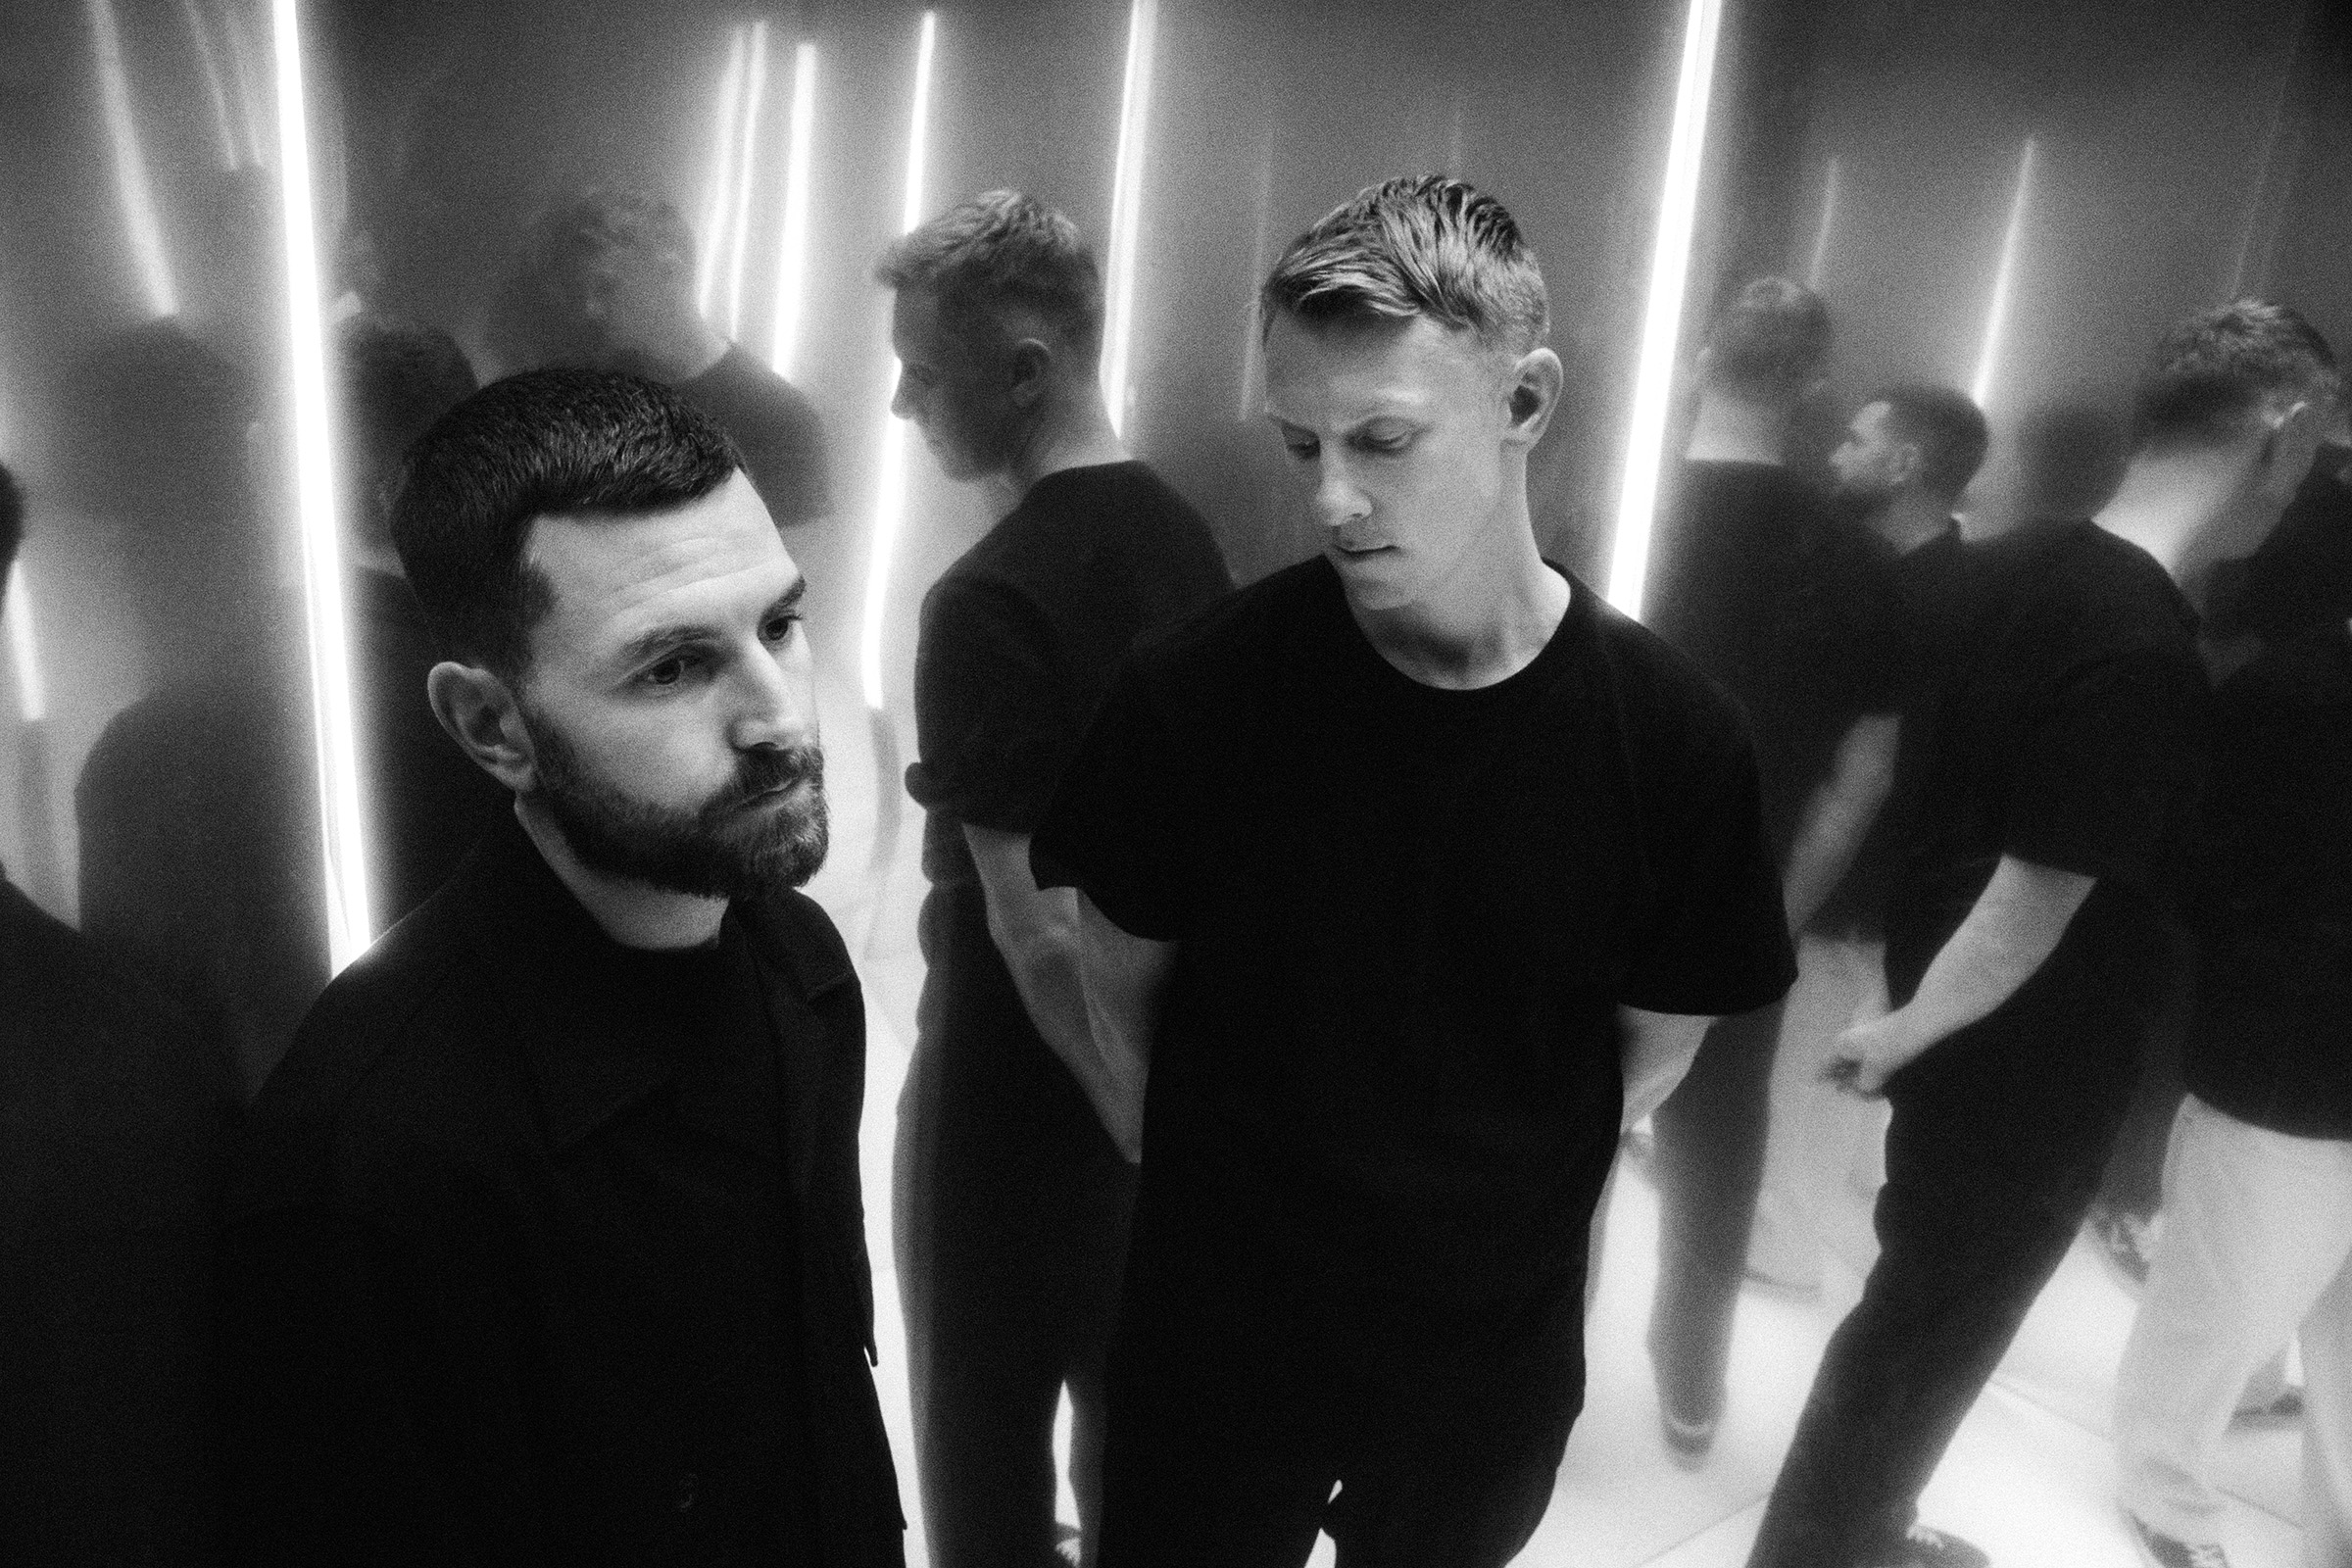 Riding high after the release of Isles, Bicep reflect on their success